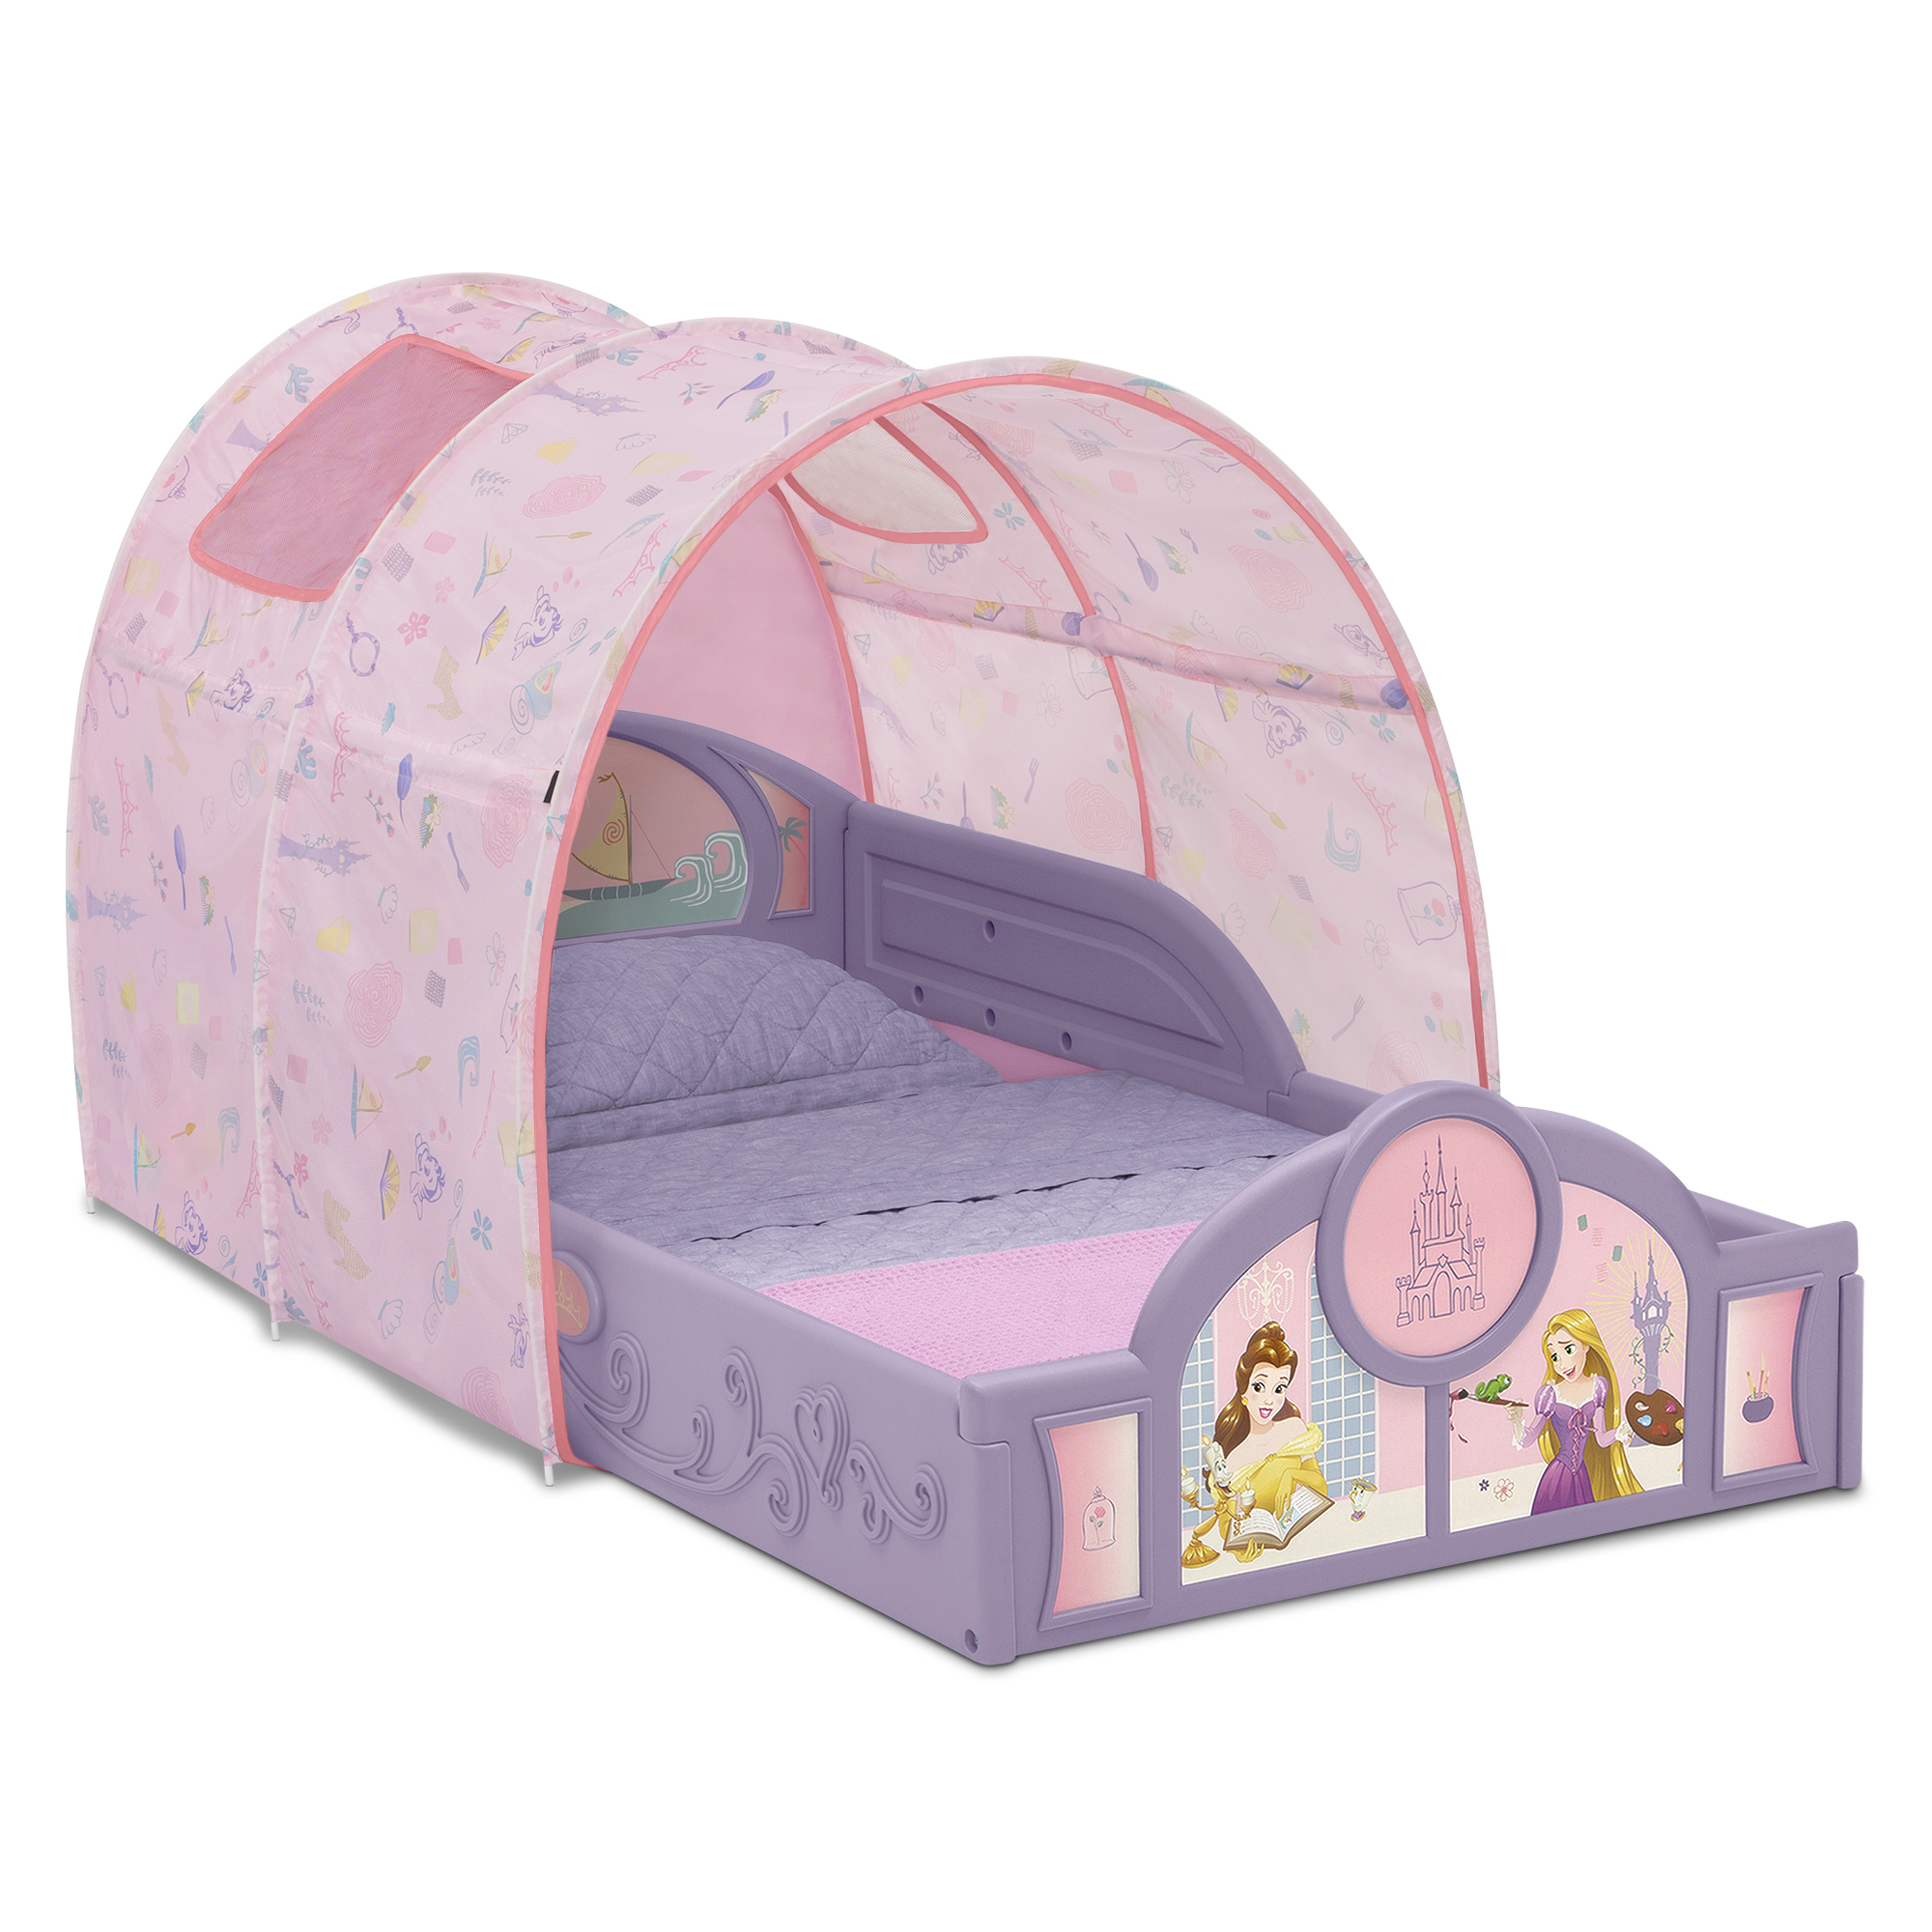 Disney Princess Sleep and Play Toddler Bed with Tent by Delta Children, Purple/Pink - image 1 of 7